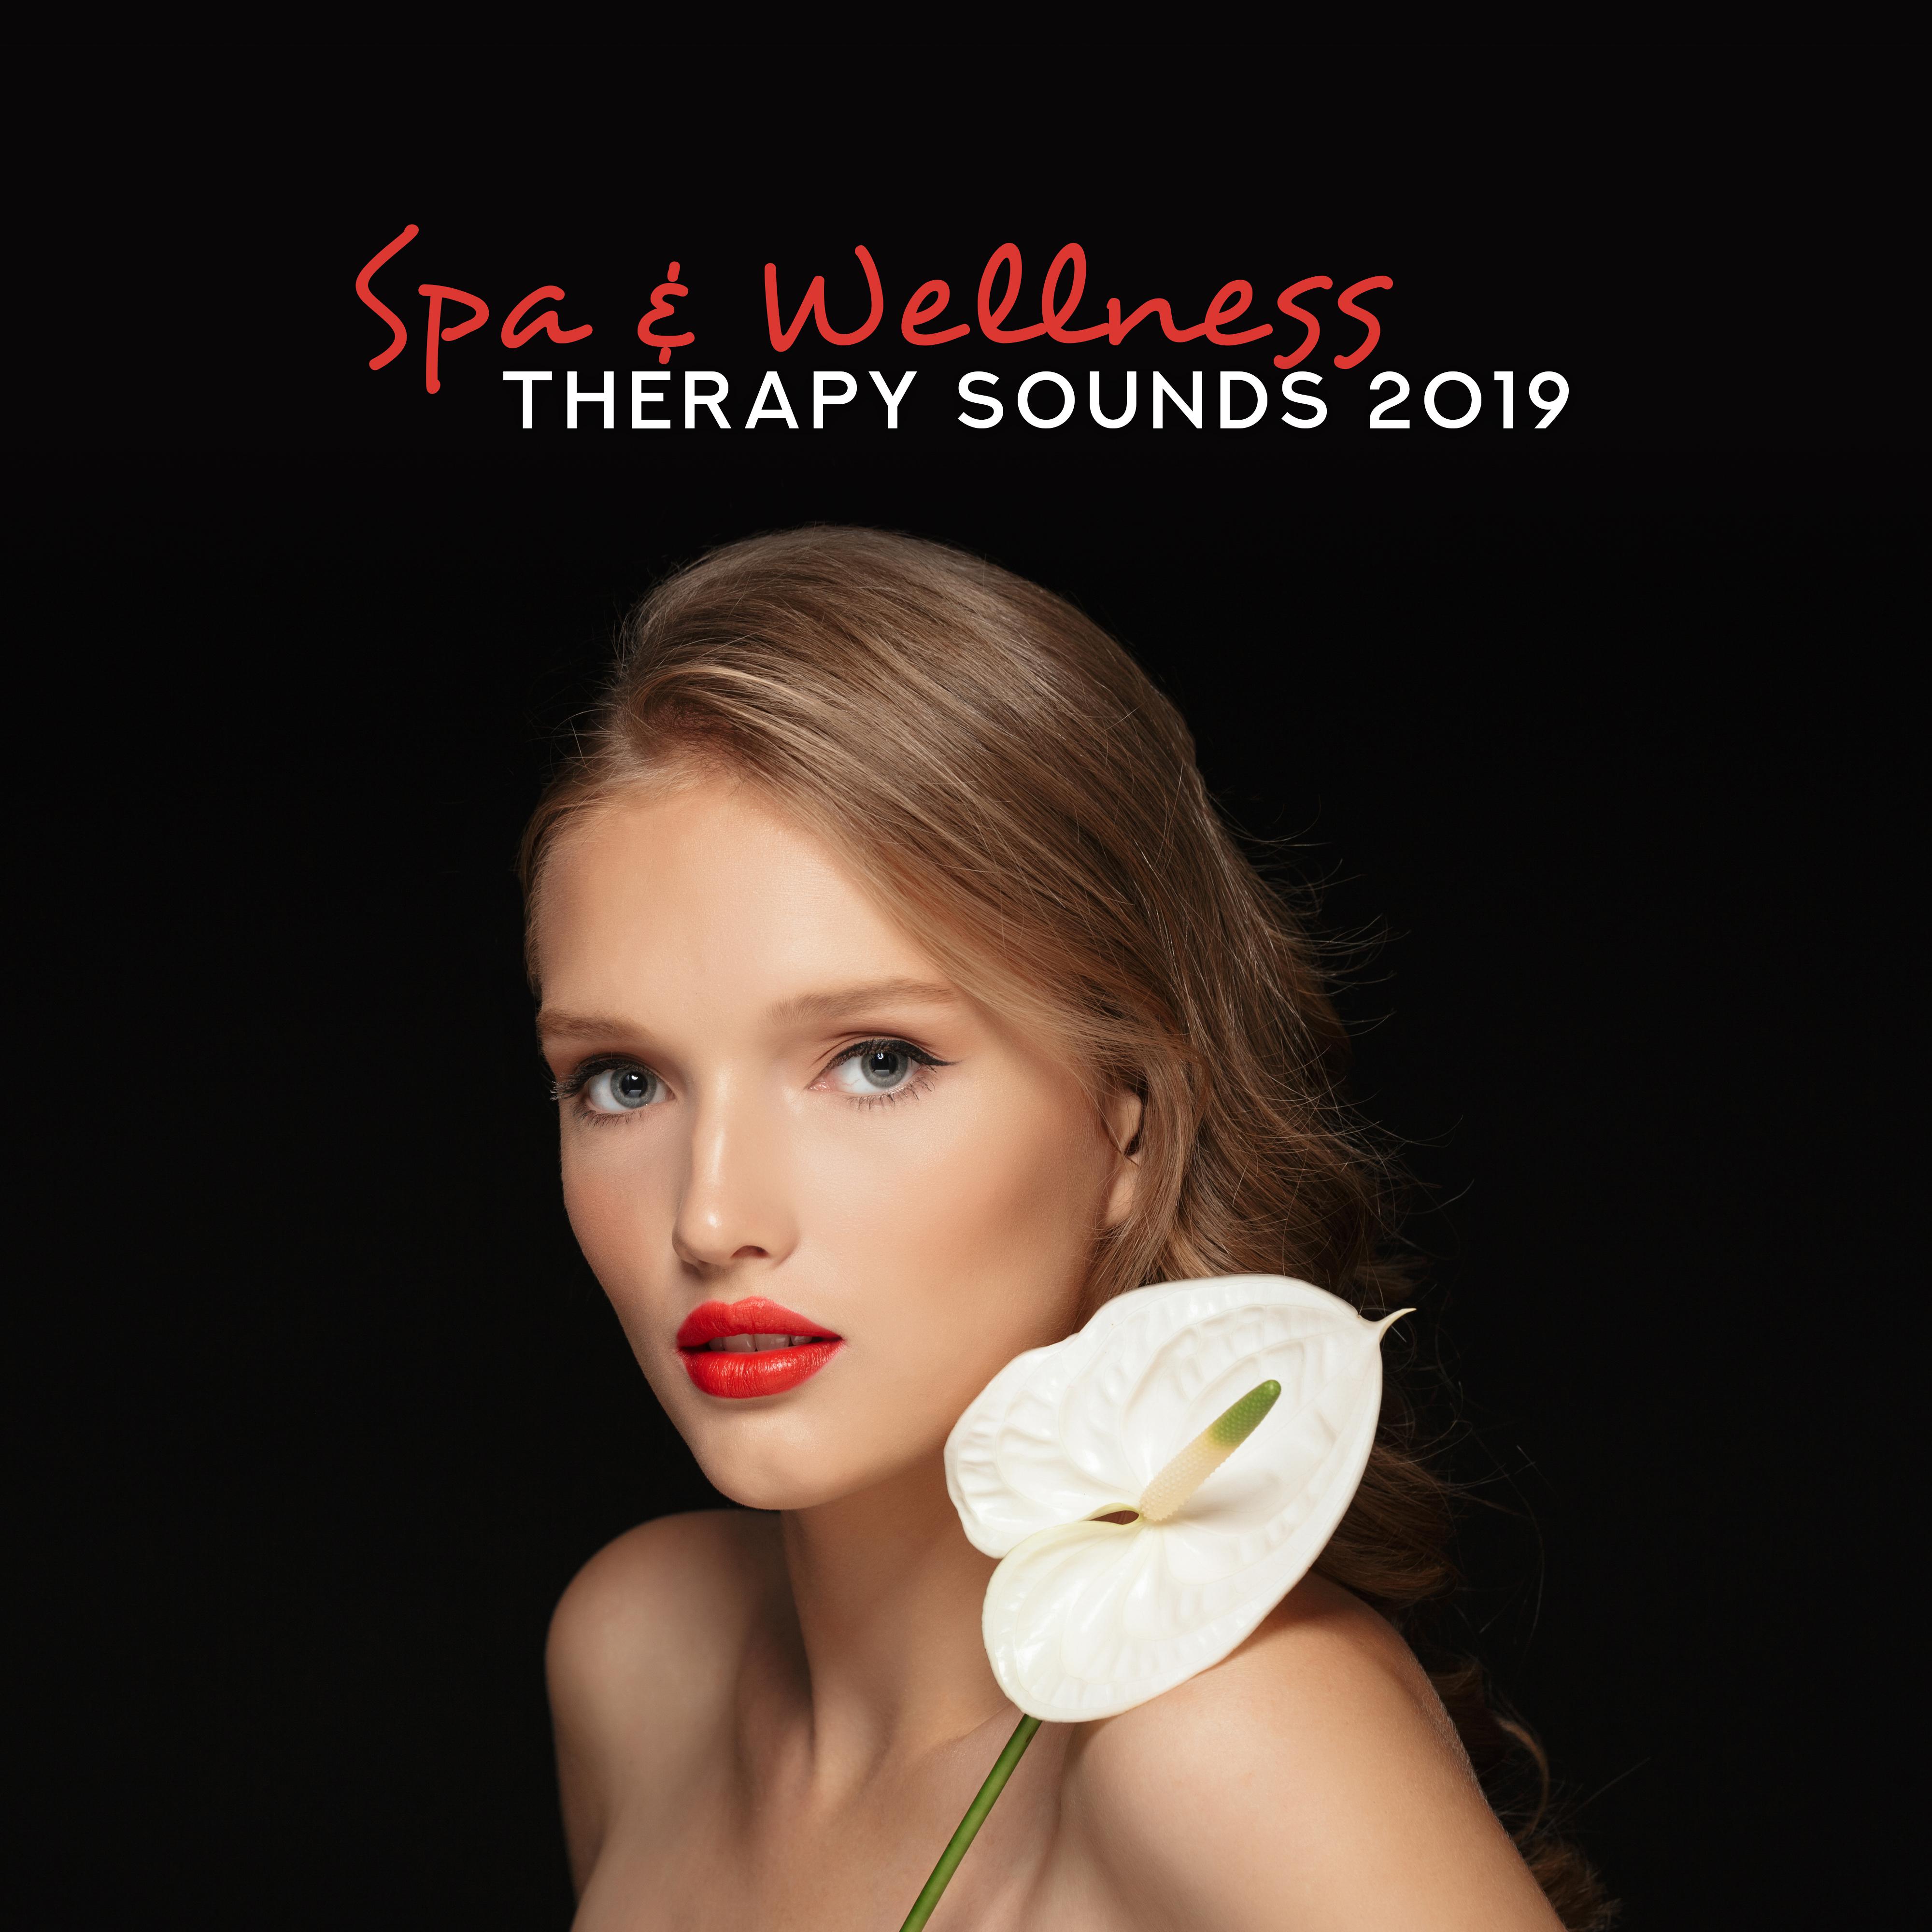 Spa & Wellness Therapy Sounds 2019